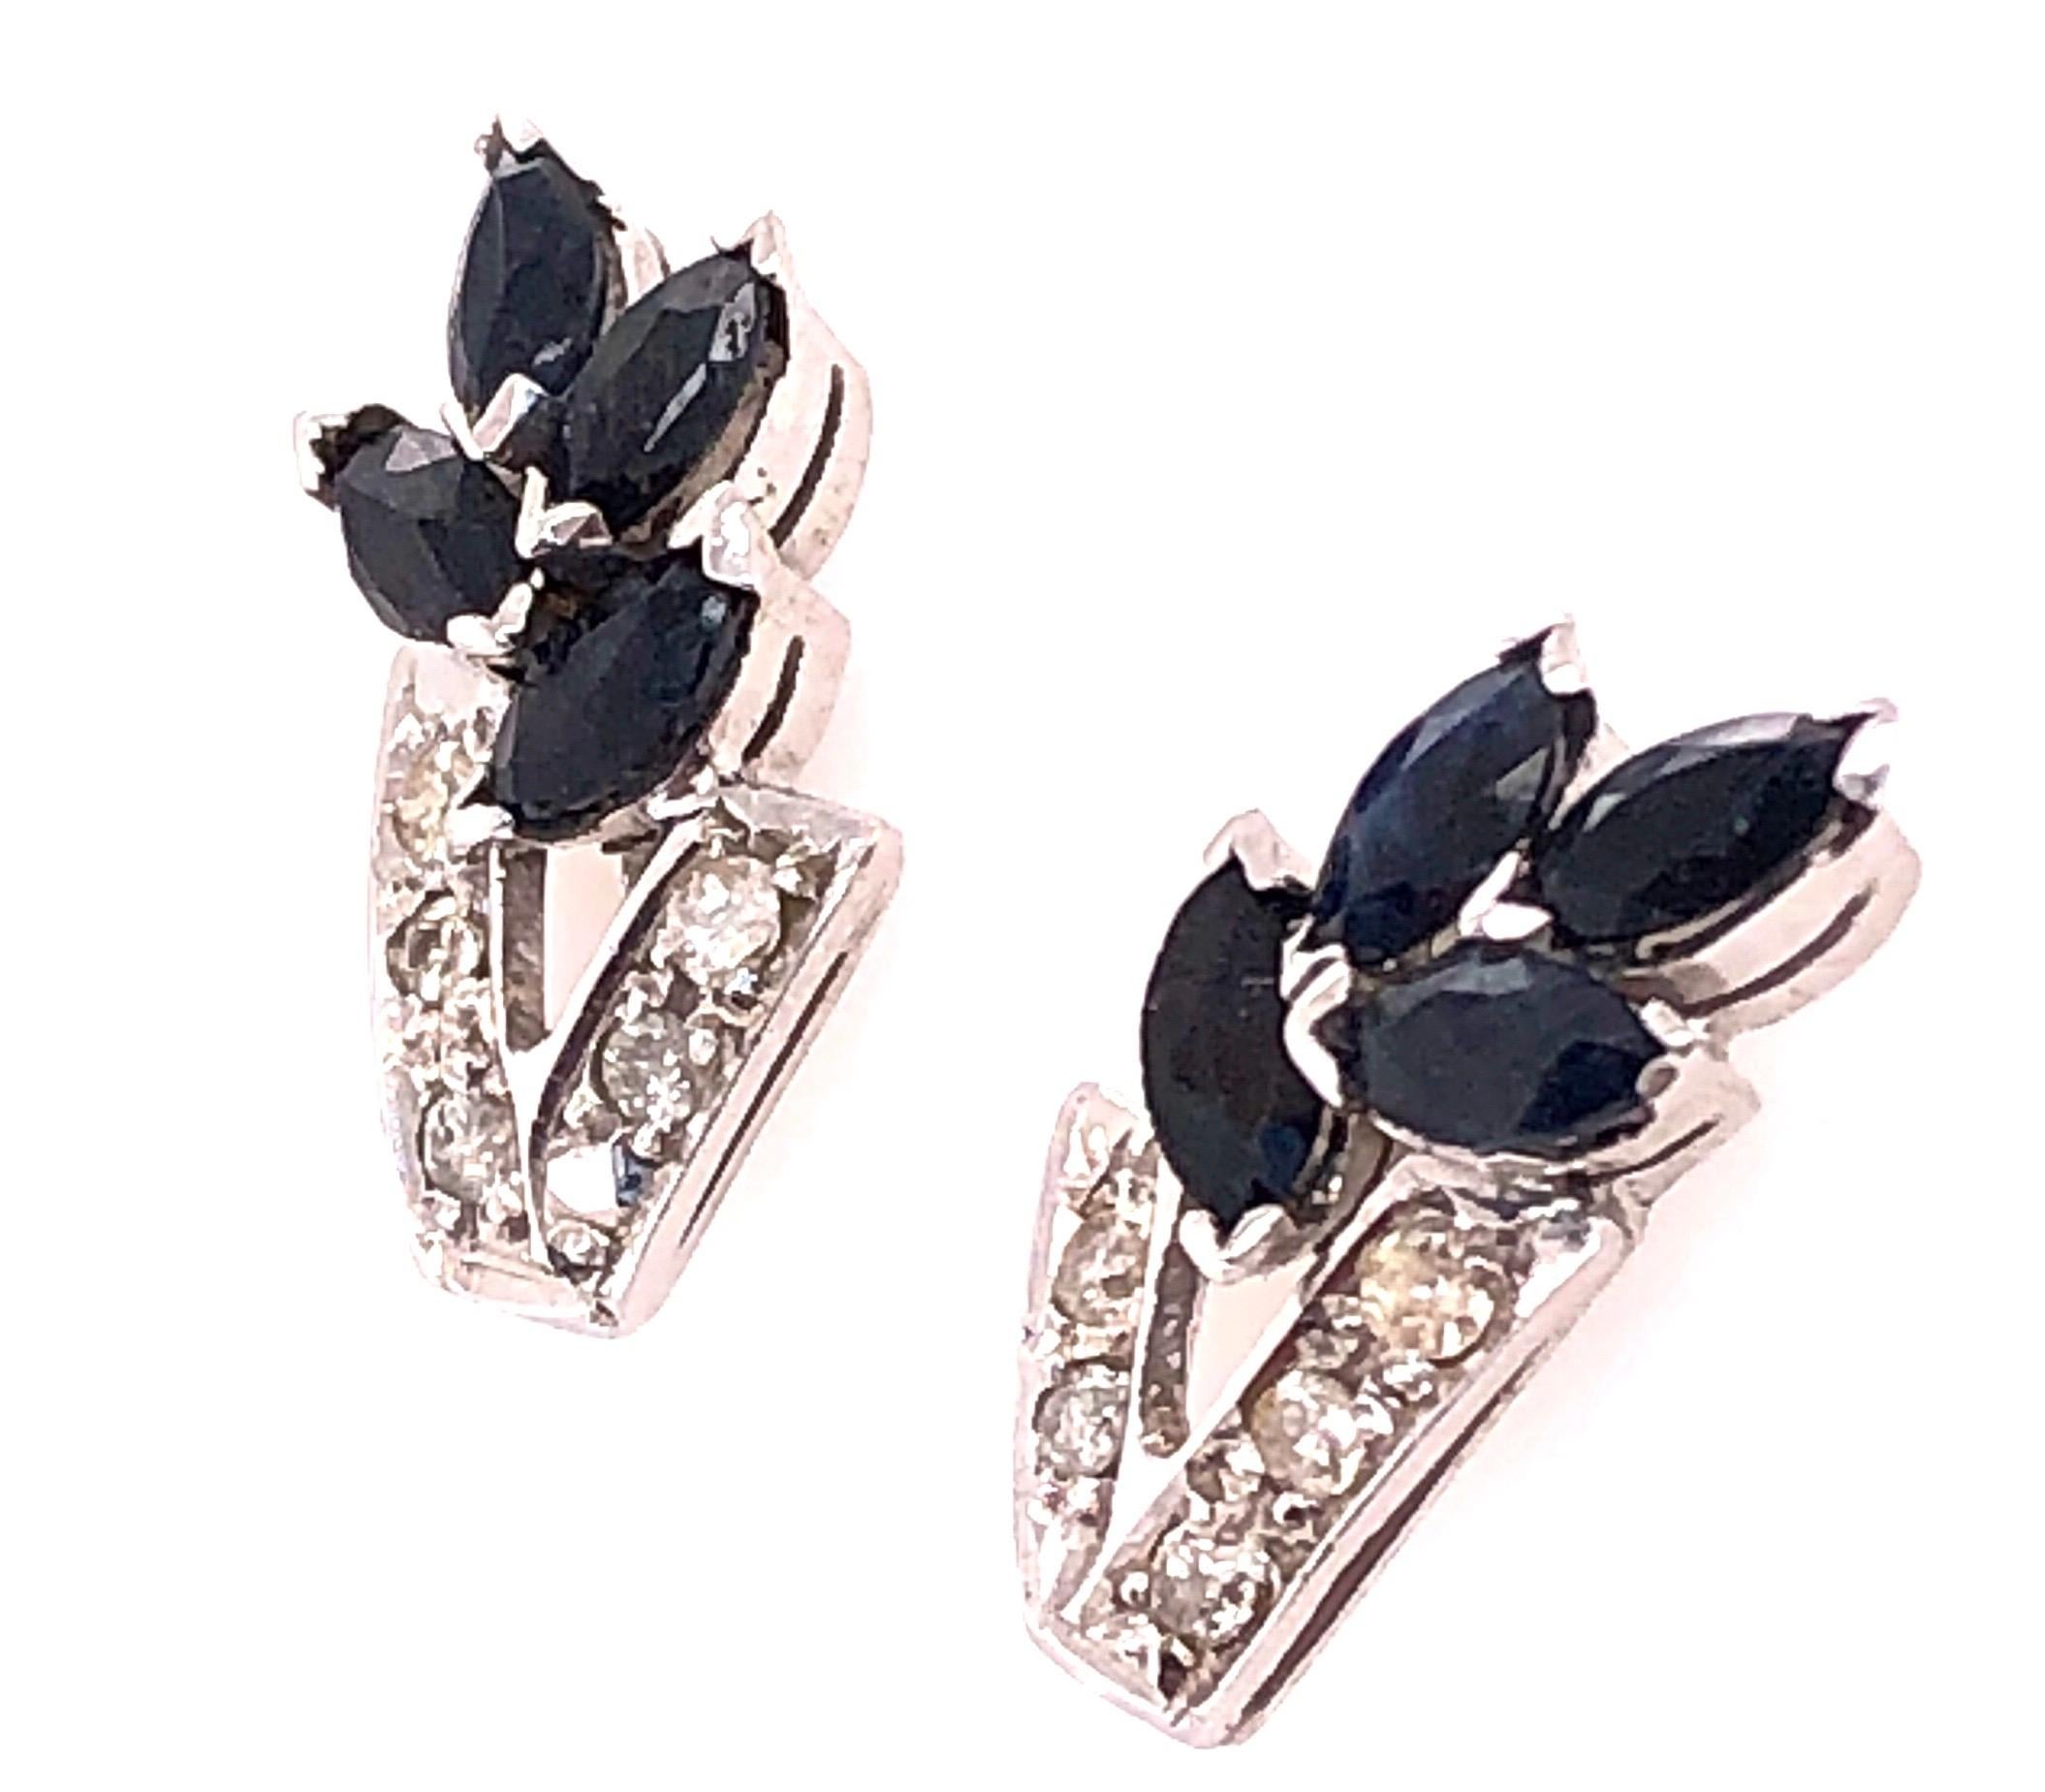 14 Kt White Gold Diamond And Sapphire Cluster Earrings 
0.12 Total Diamond Weight.
2.7 grams total weight.